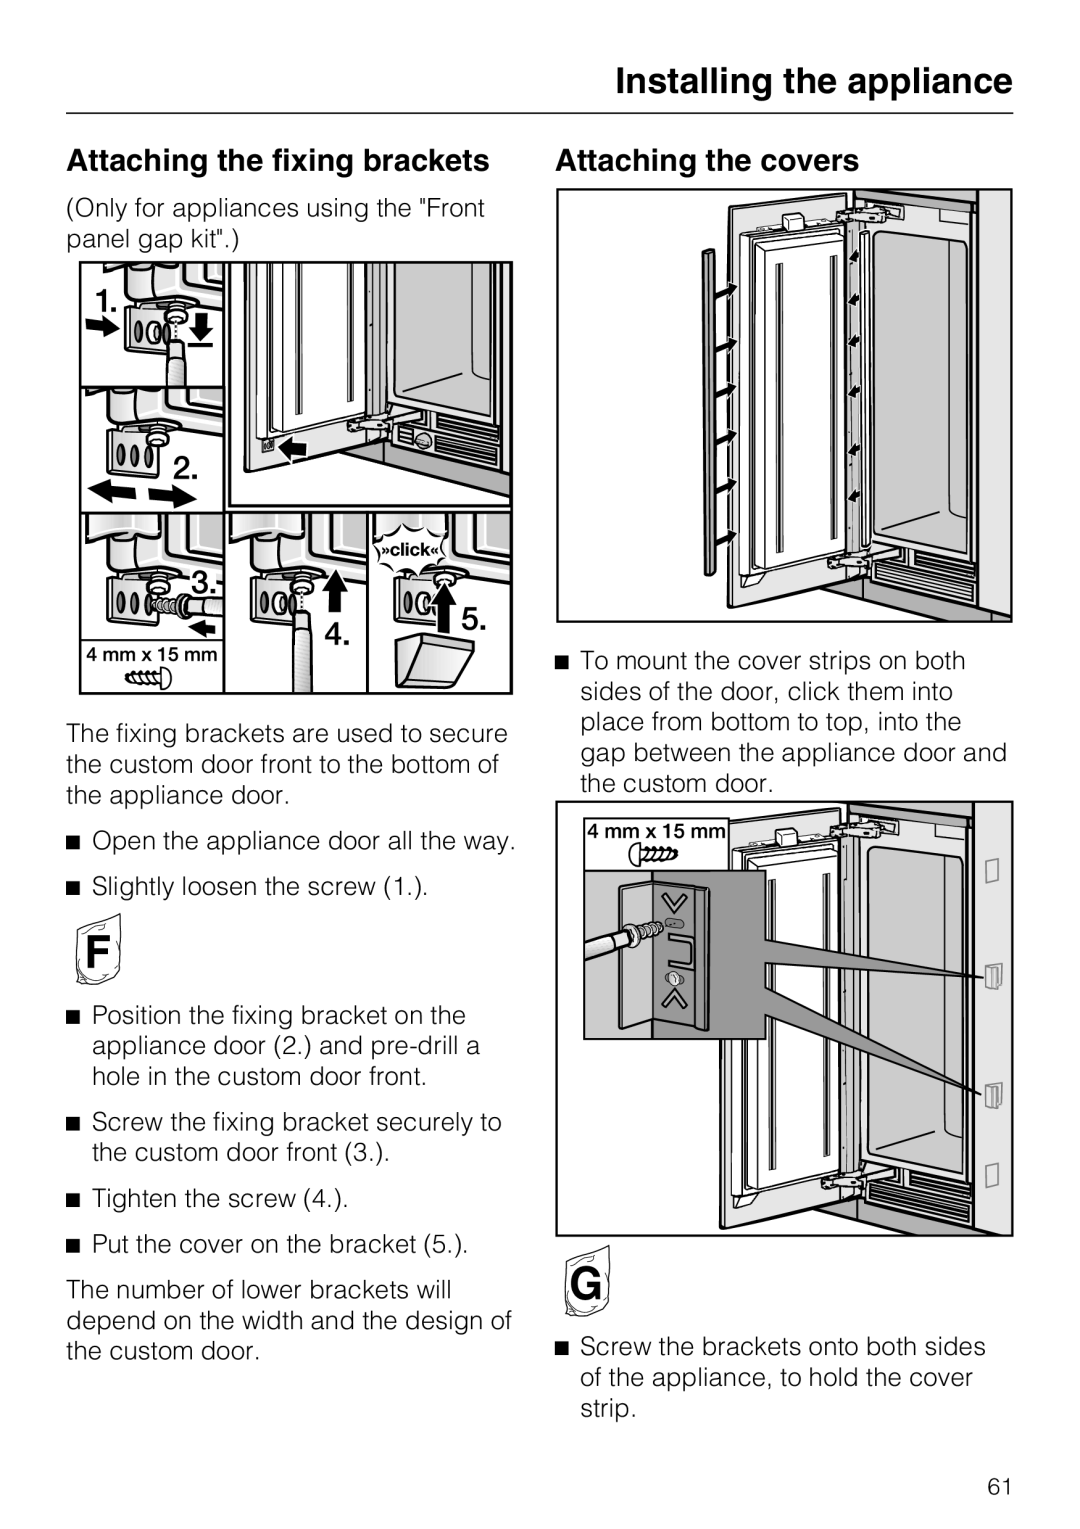 Miele 09 920 570 installation instructions Attaching the fixing brackets, Attaching the covers, Installing the appliance 